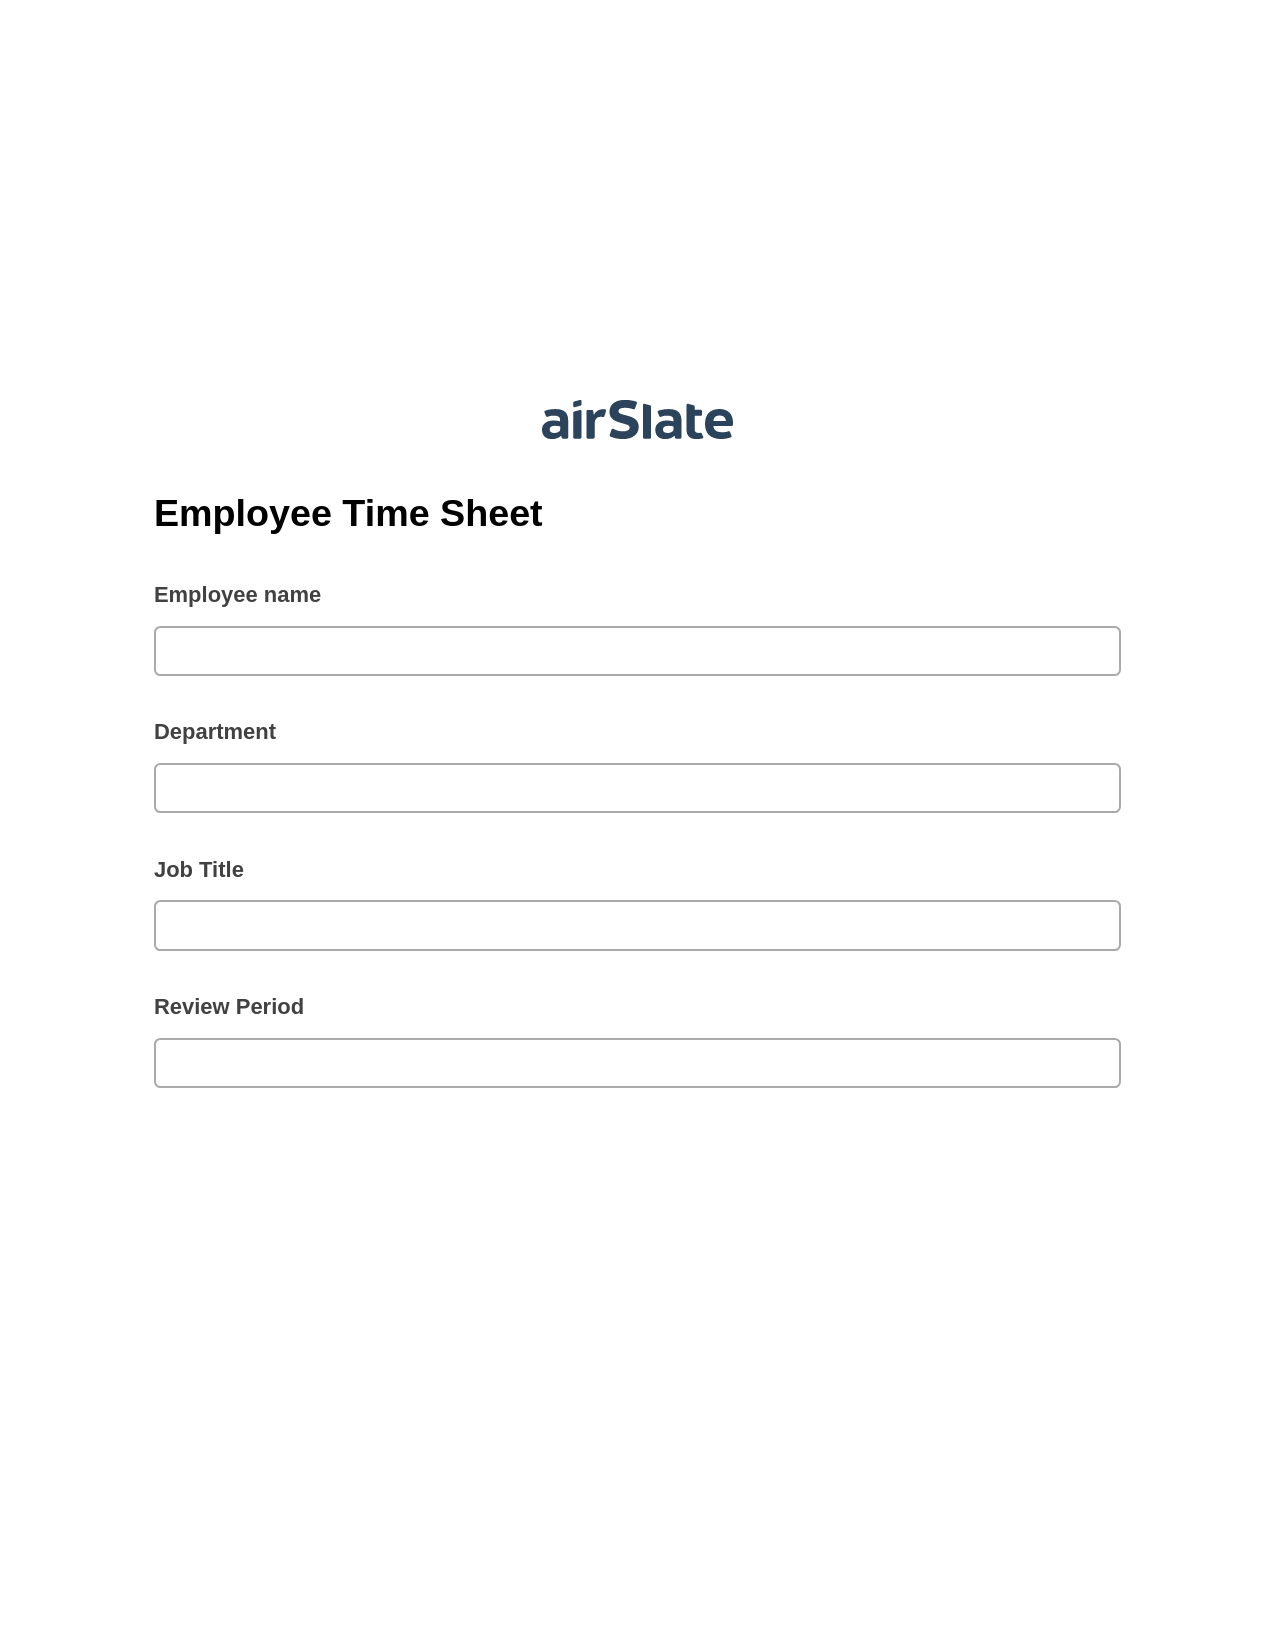 Multirole Employee Time Sheet Pre-fill from MS Dynamics 365 Records, Update Audit Trail Bot, Export to Salesforce Record Bot